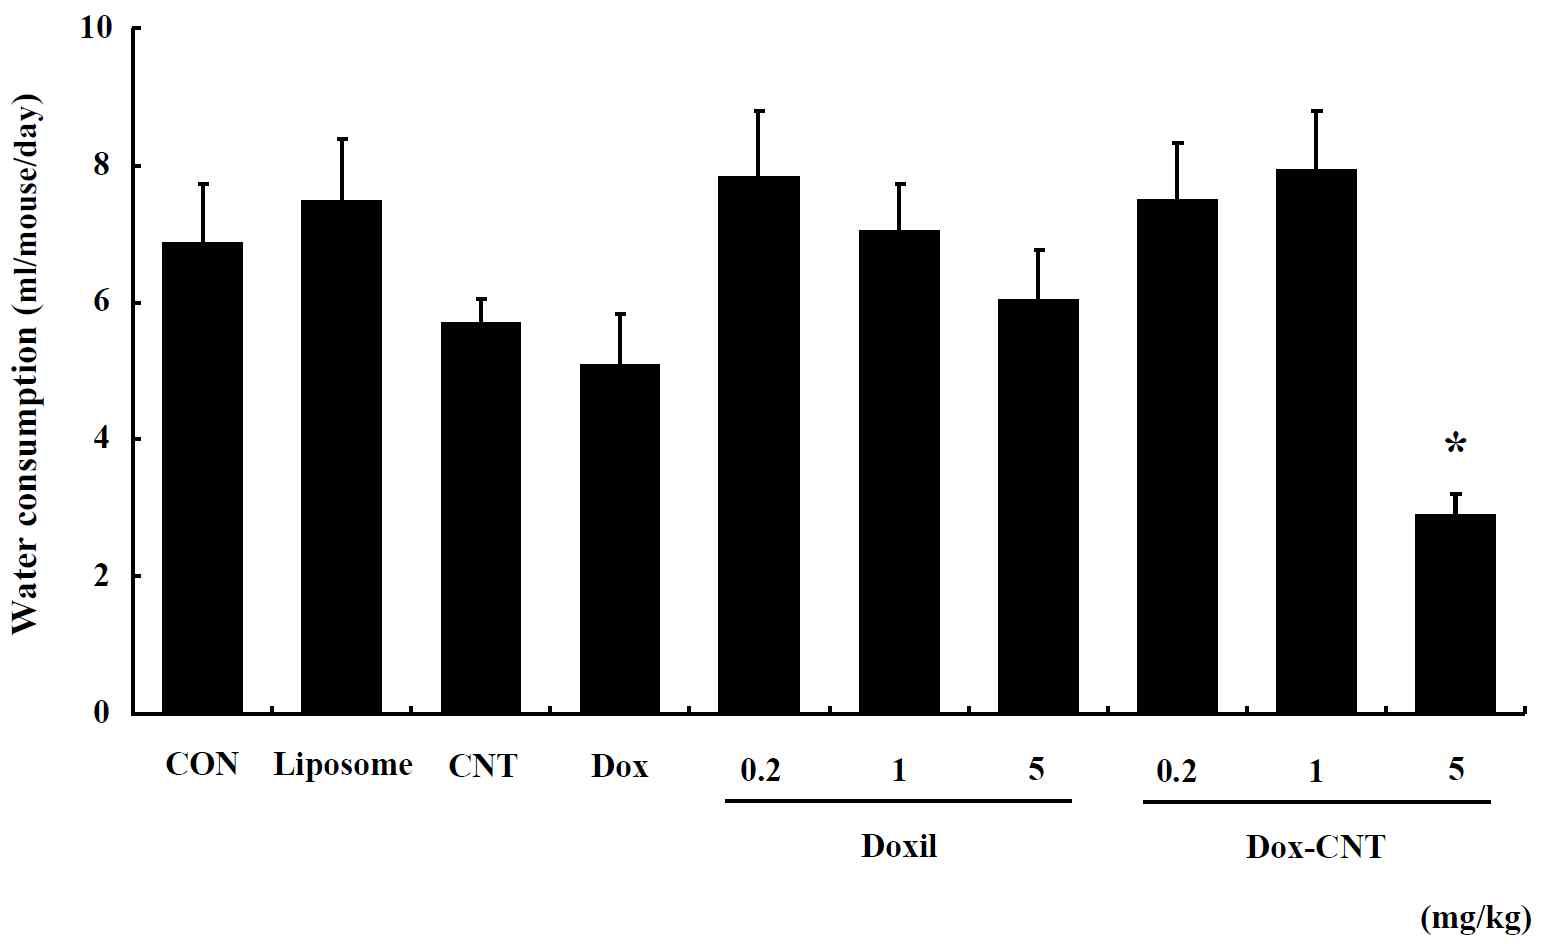 The change of water consumption in male ICR mice for 14 days after repeated exposure. Mice were respectively administered by intravenous injection with liposome, CNT, Dox, Doxil (0.2, 1, 5 mg/kg) and Dox-CNT (0.2, 1, 5 mg/kg). The results are presented as mean ± SE (n = 10). * p < 0.05, significantly different from the control.